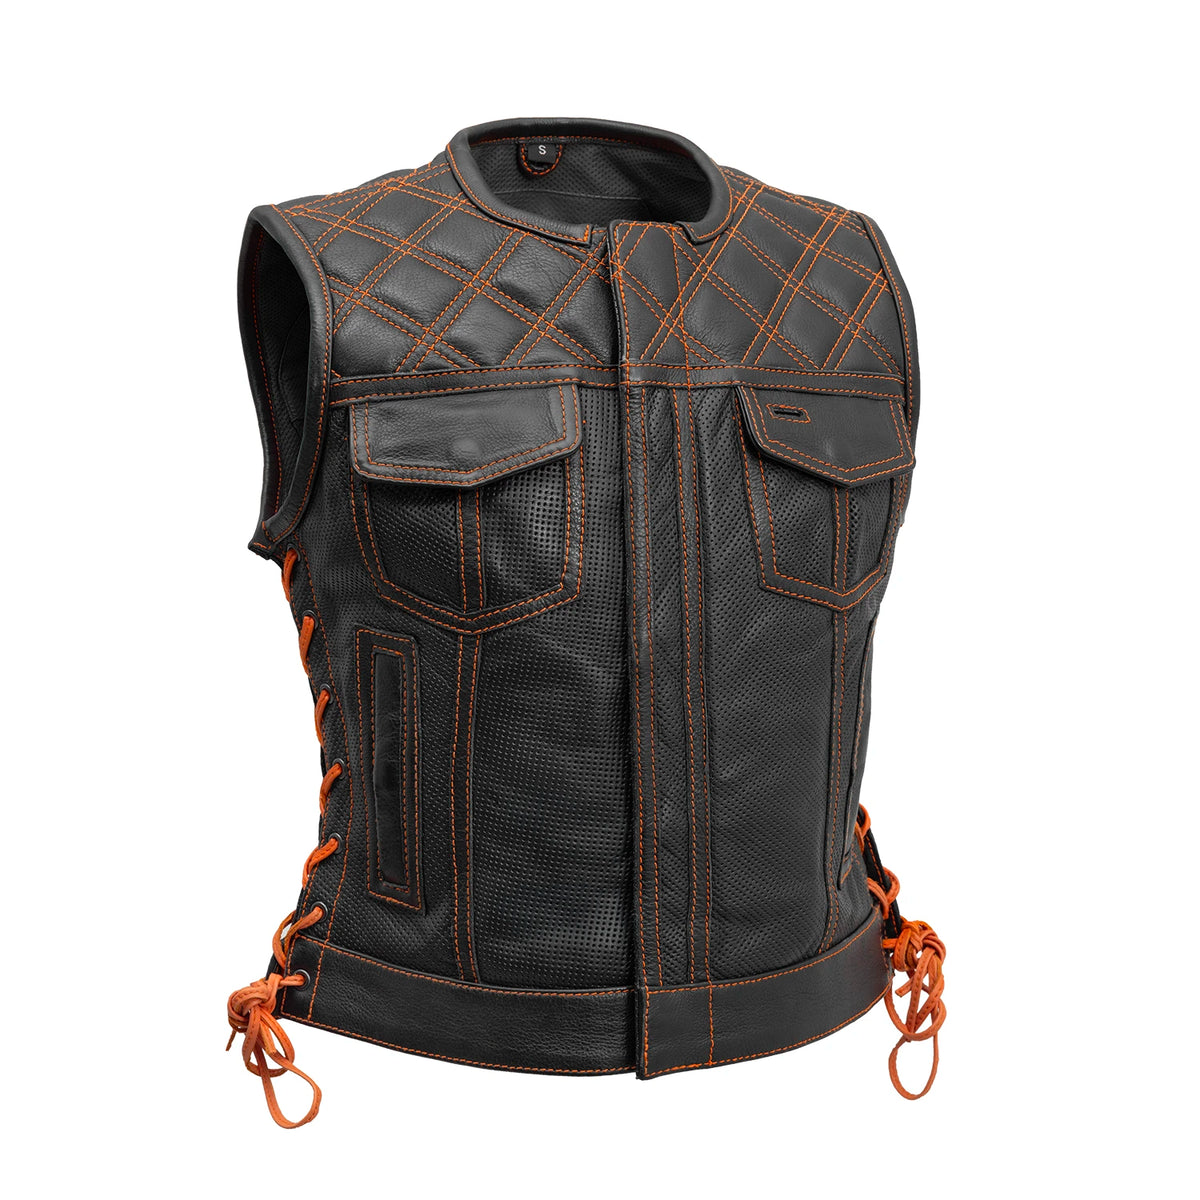 Bonnie Perforated Women's Motorcycle Leather Vest Women's Leather Vest First Manufacturing Company Black Orange XS 